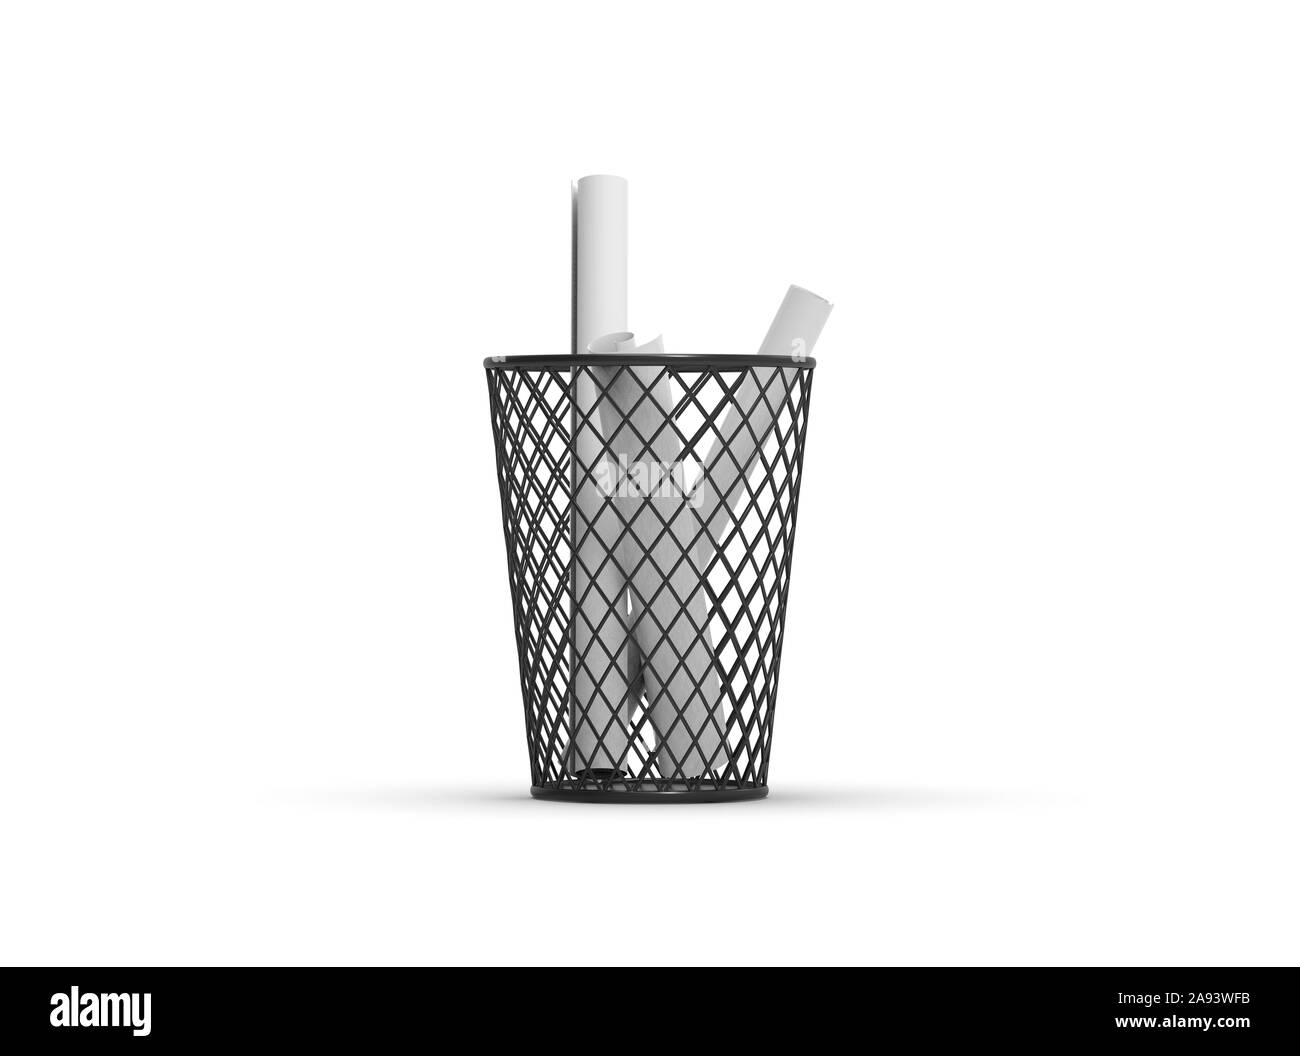 Recycle Bin on White 3D Rendering Stock Photo